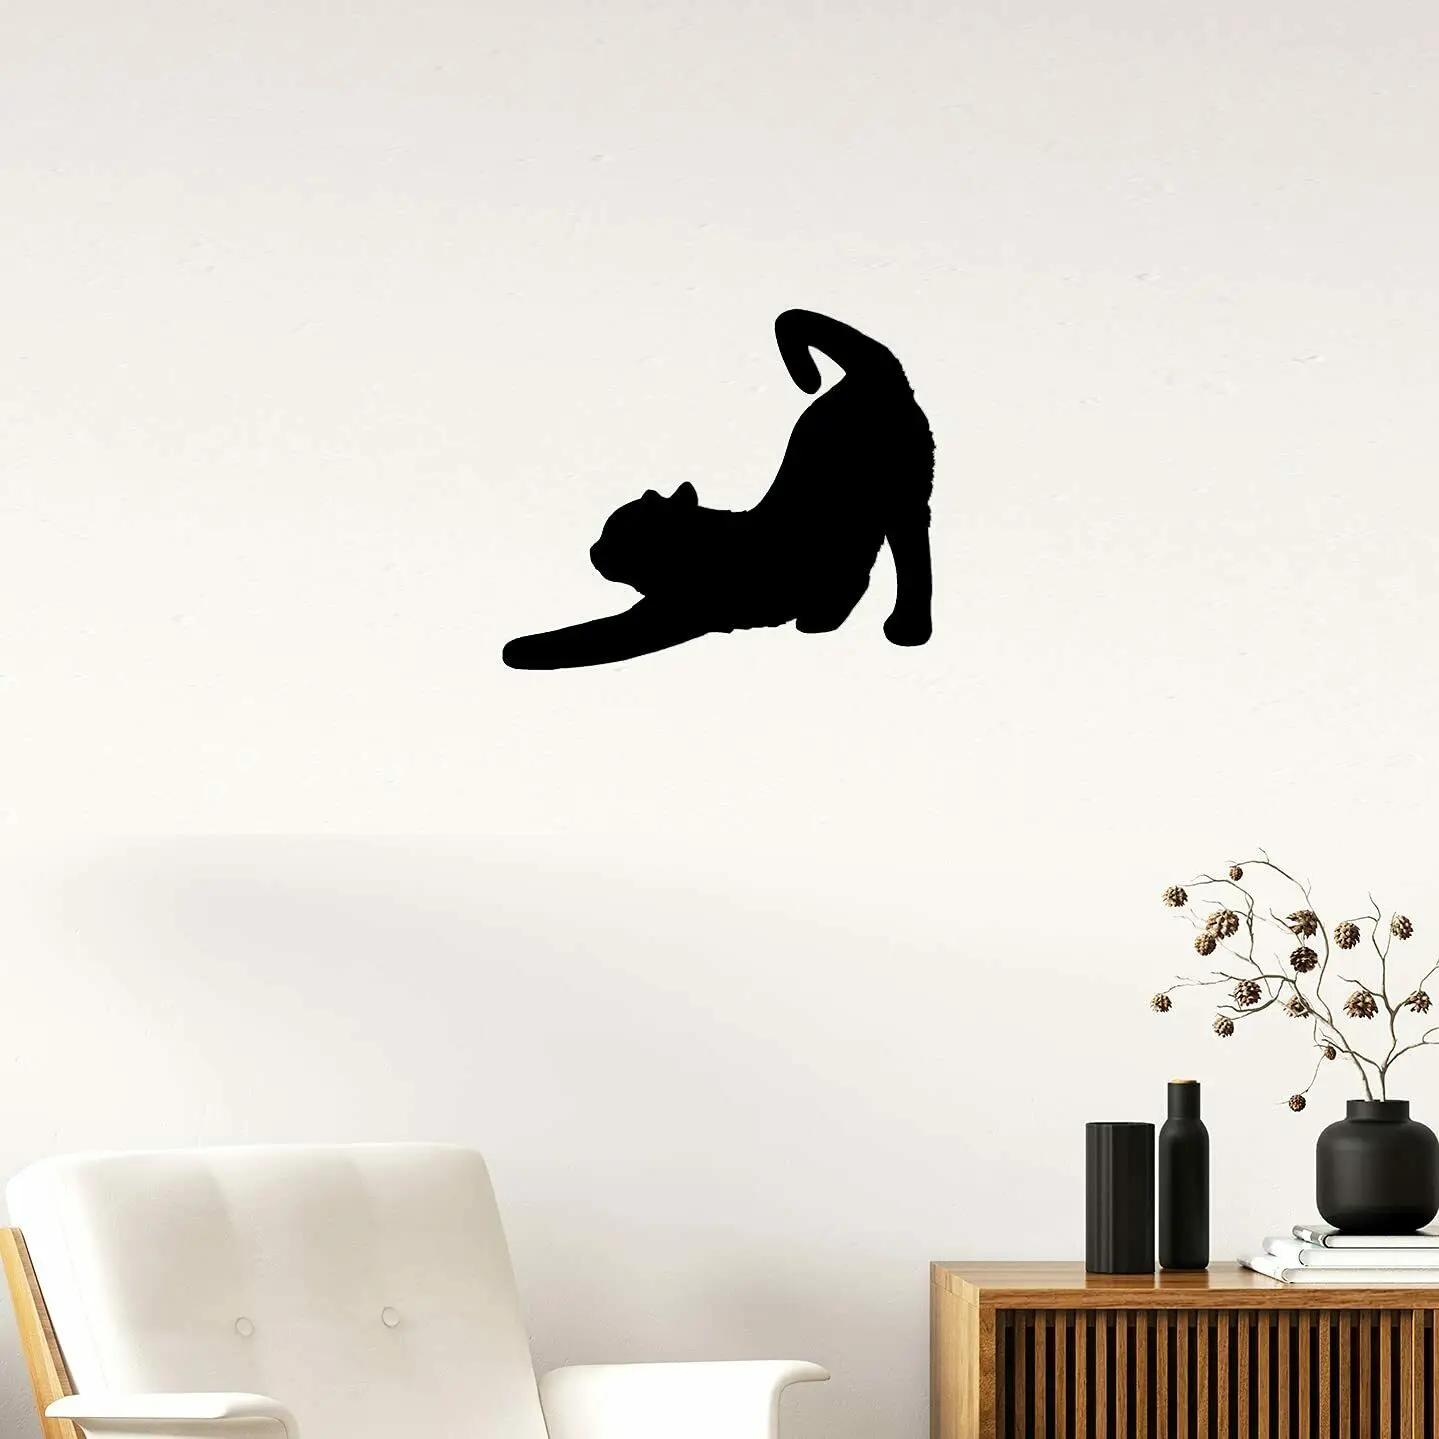 

Cat Stretching Metal Wall Sign|Cat Silhouette Wall Decor|Indoor Outdoor Cat Sign TY2631, Black